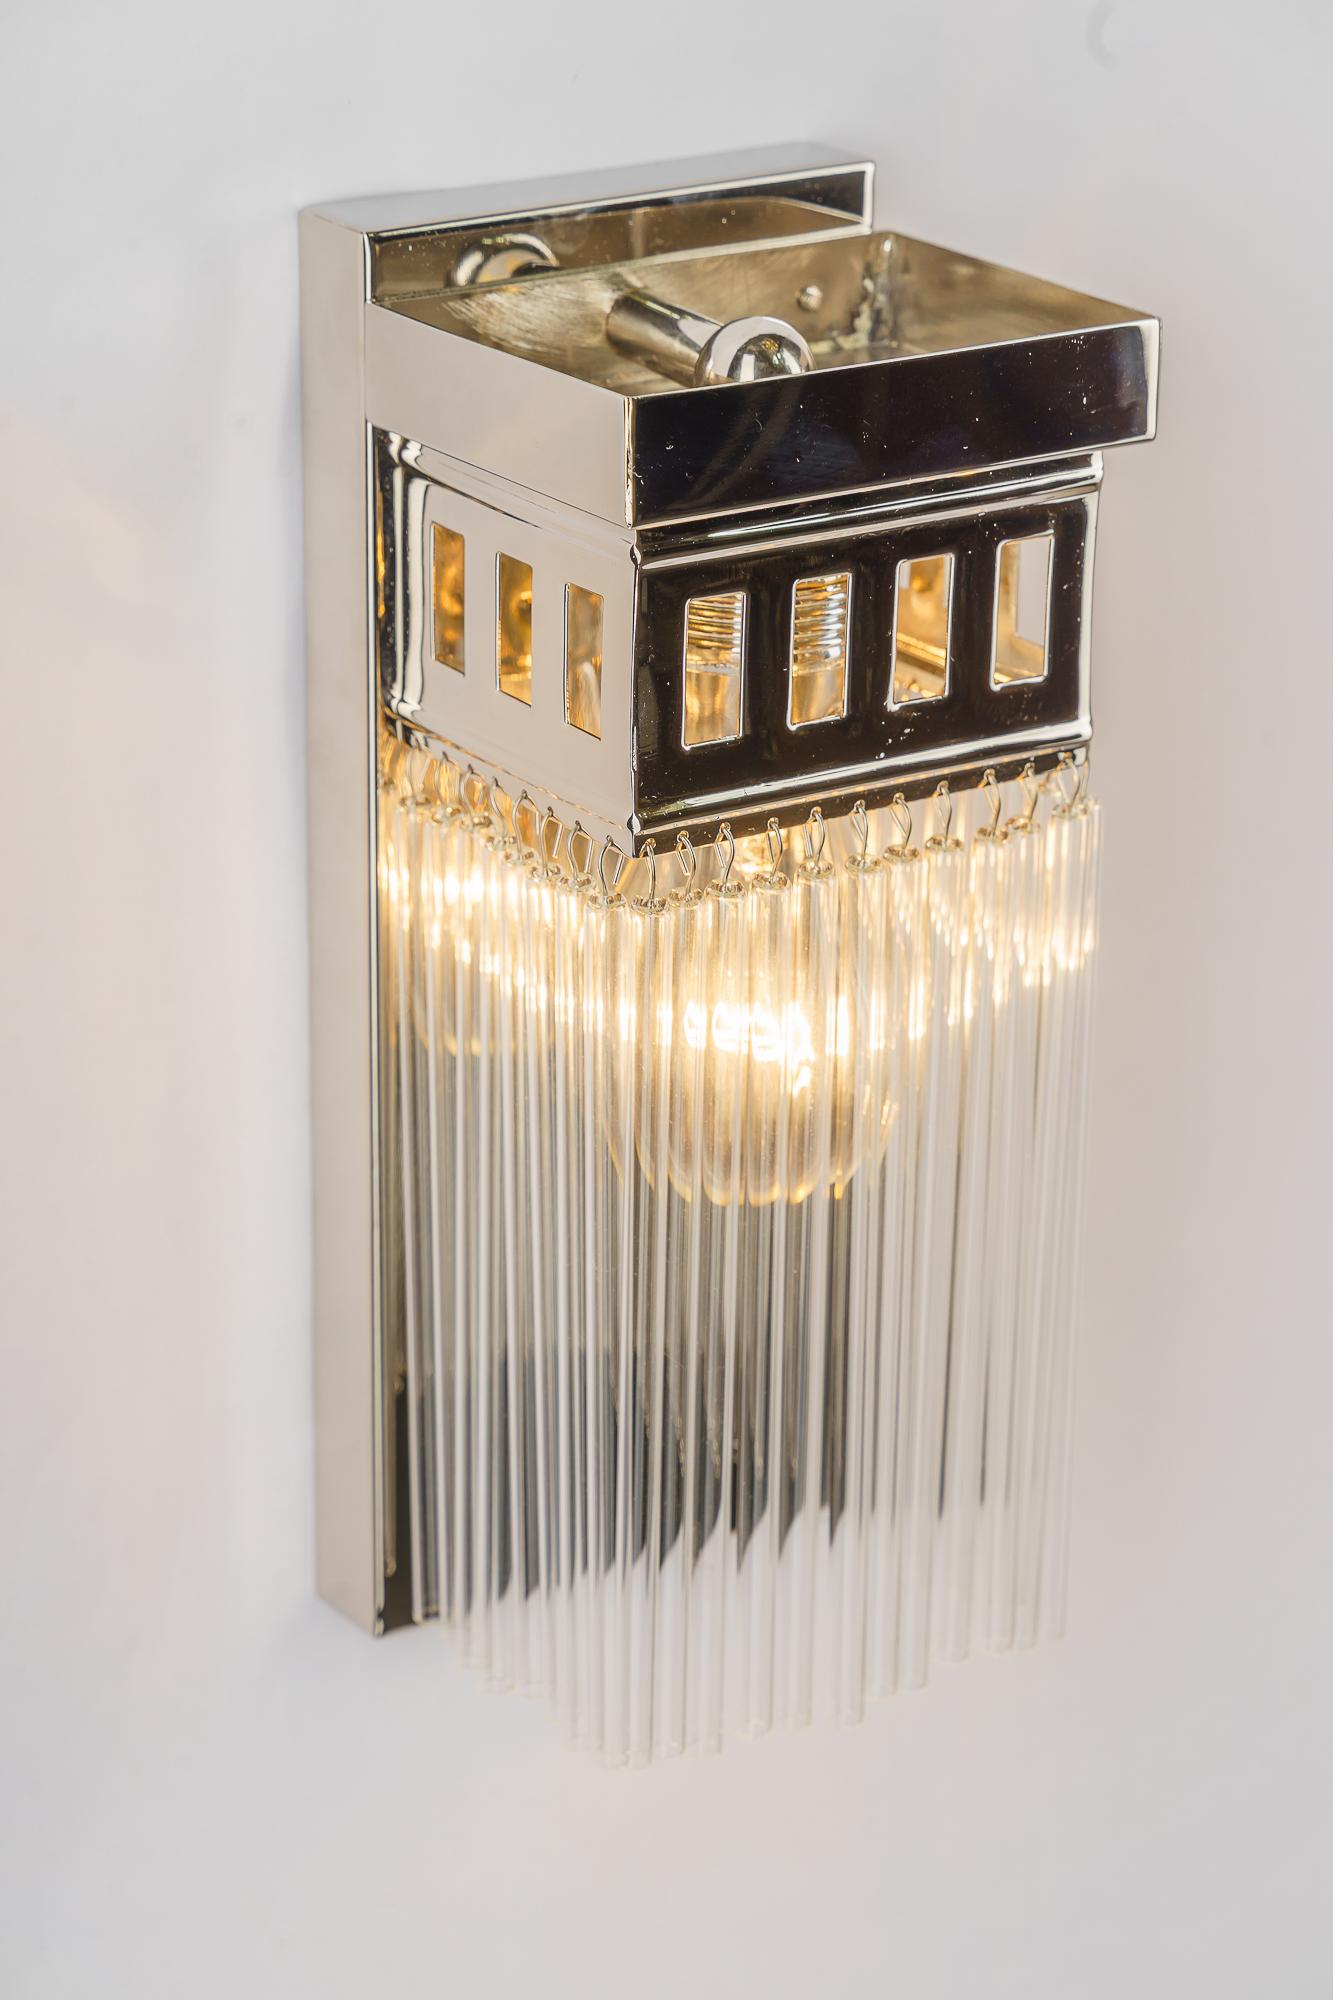 Reproduction of a nickel - plated art deco wall lamp with glass sticks For Sale 2